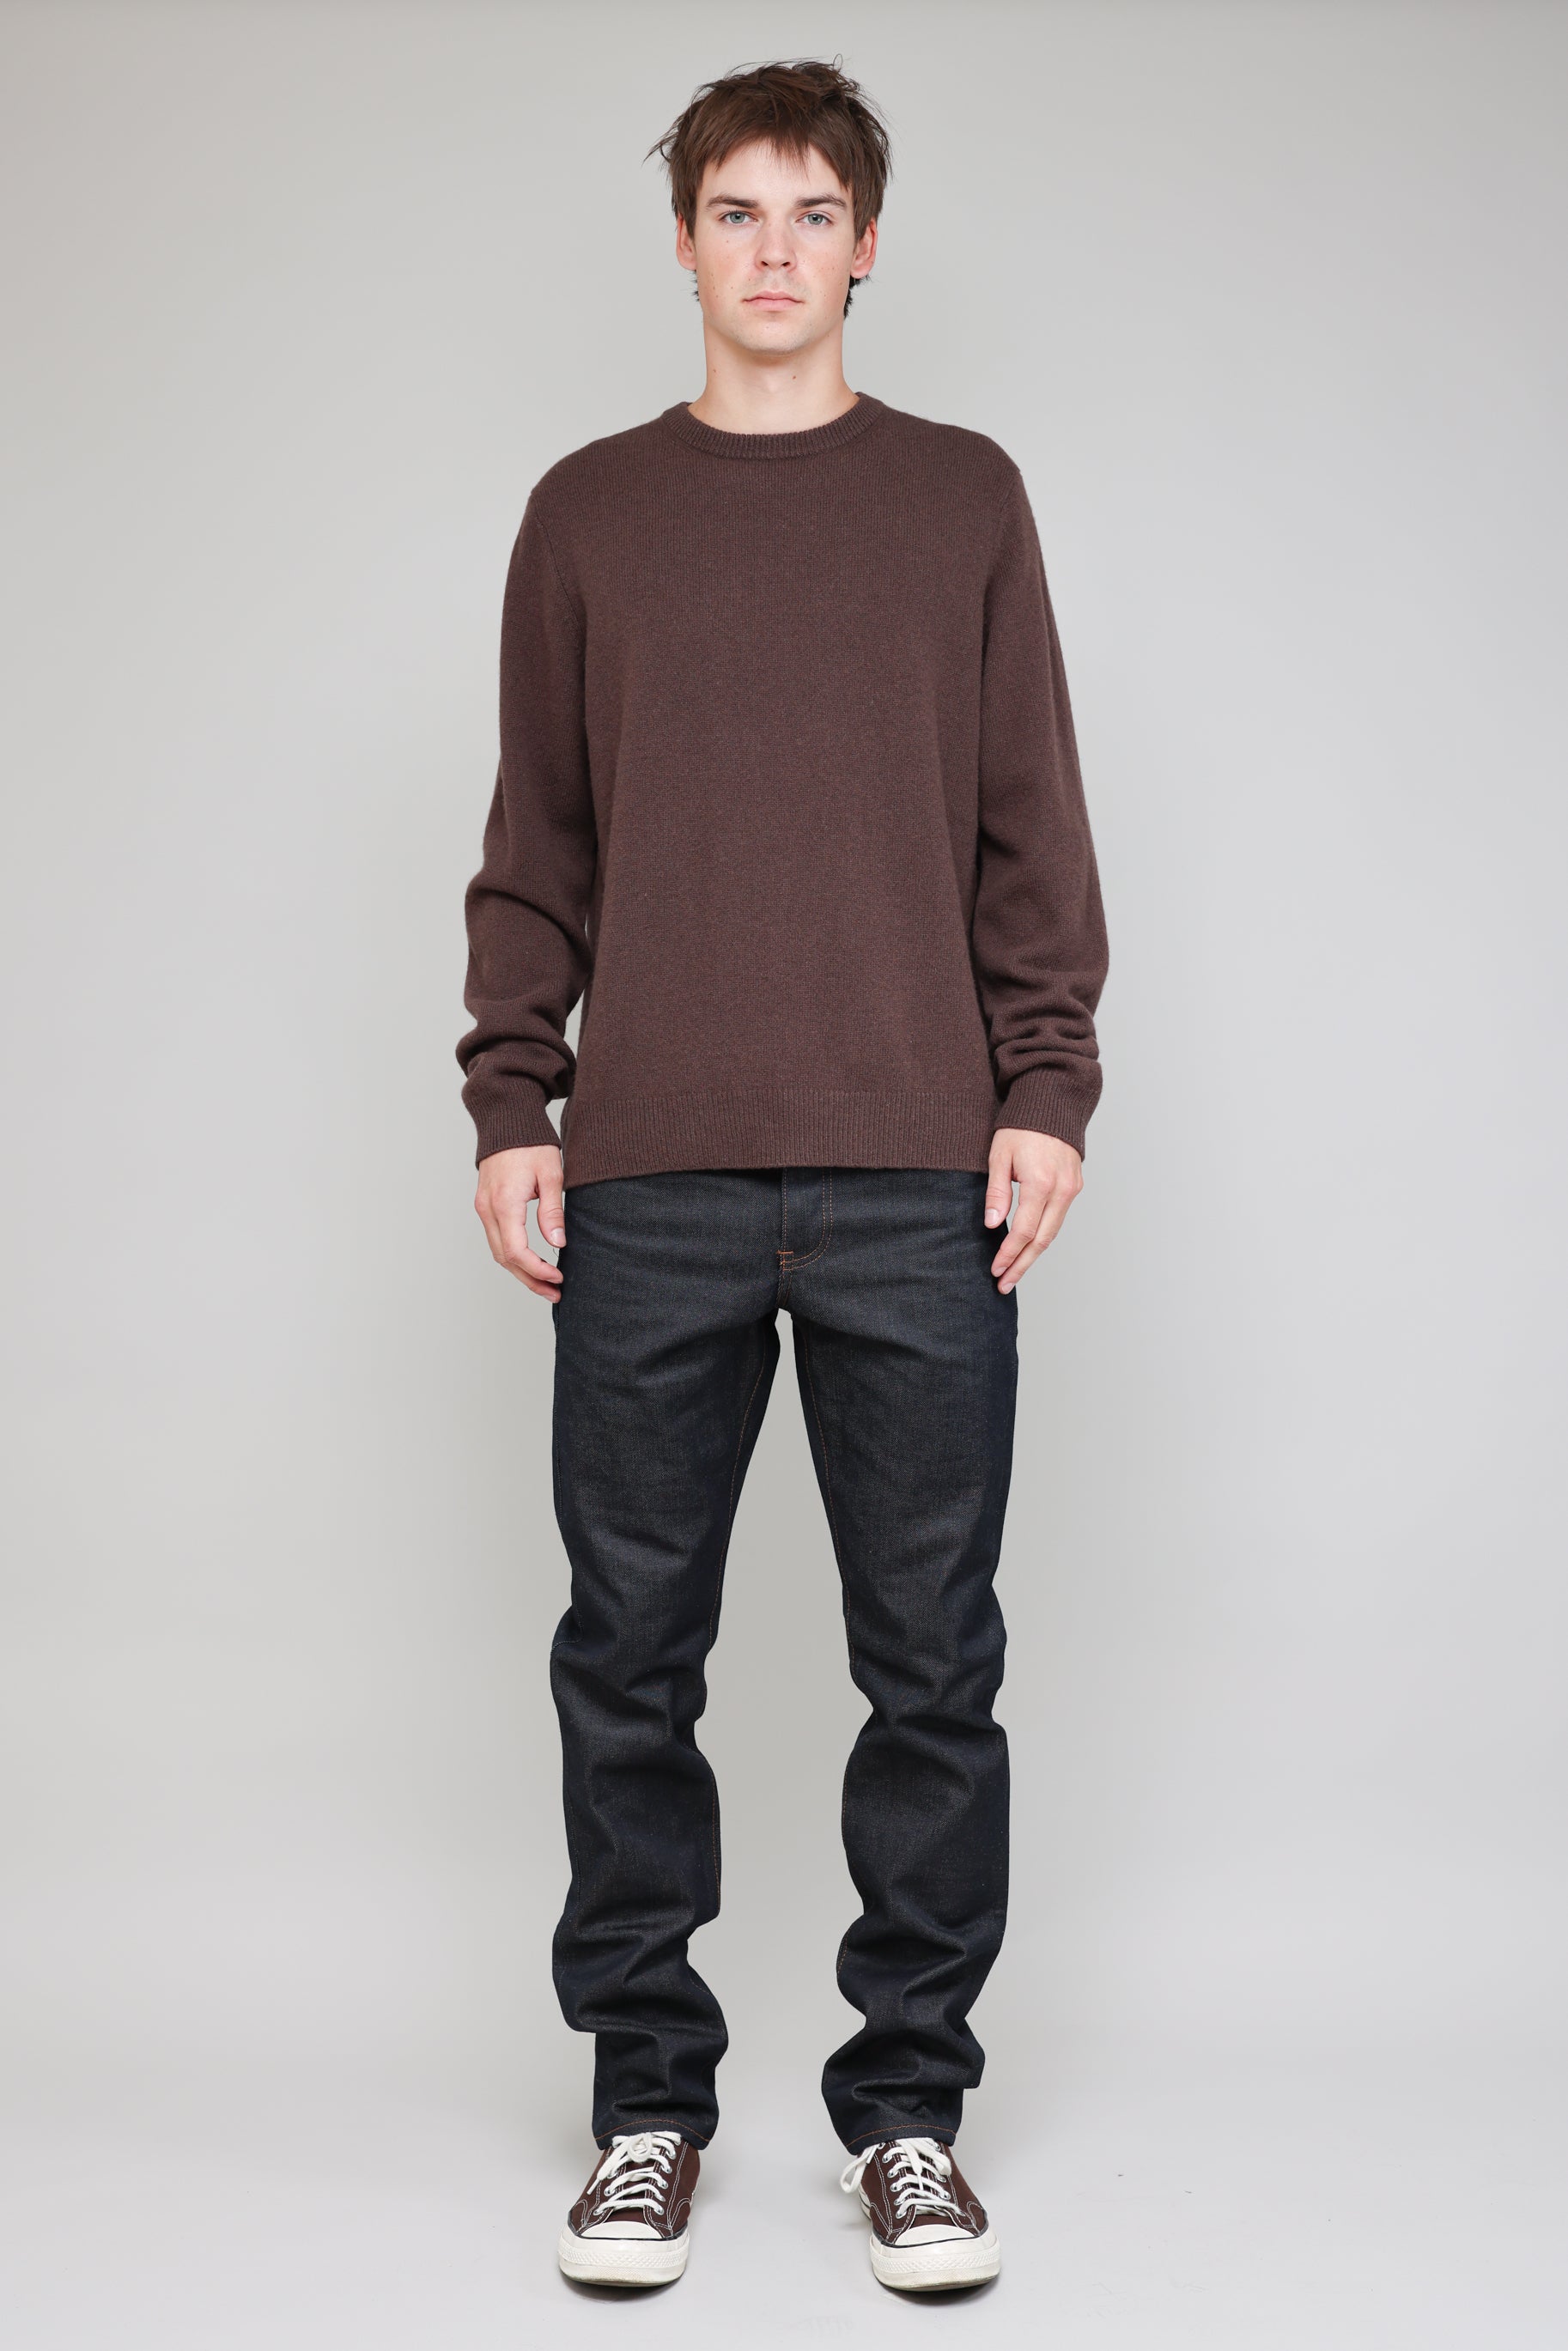 New Wool Crew in Brown 05